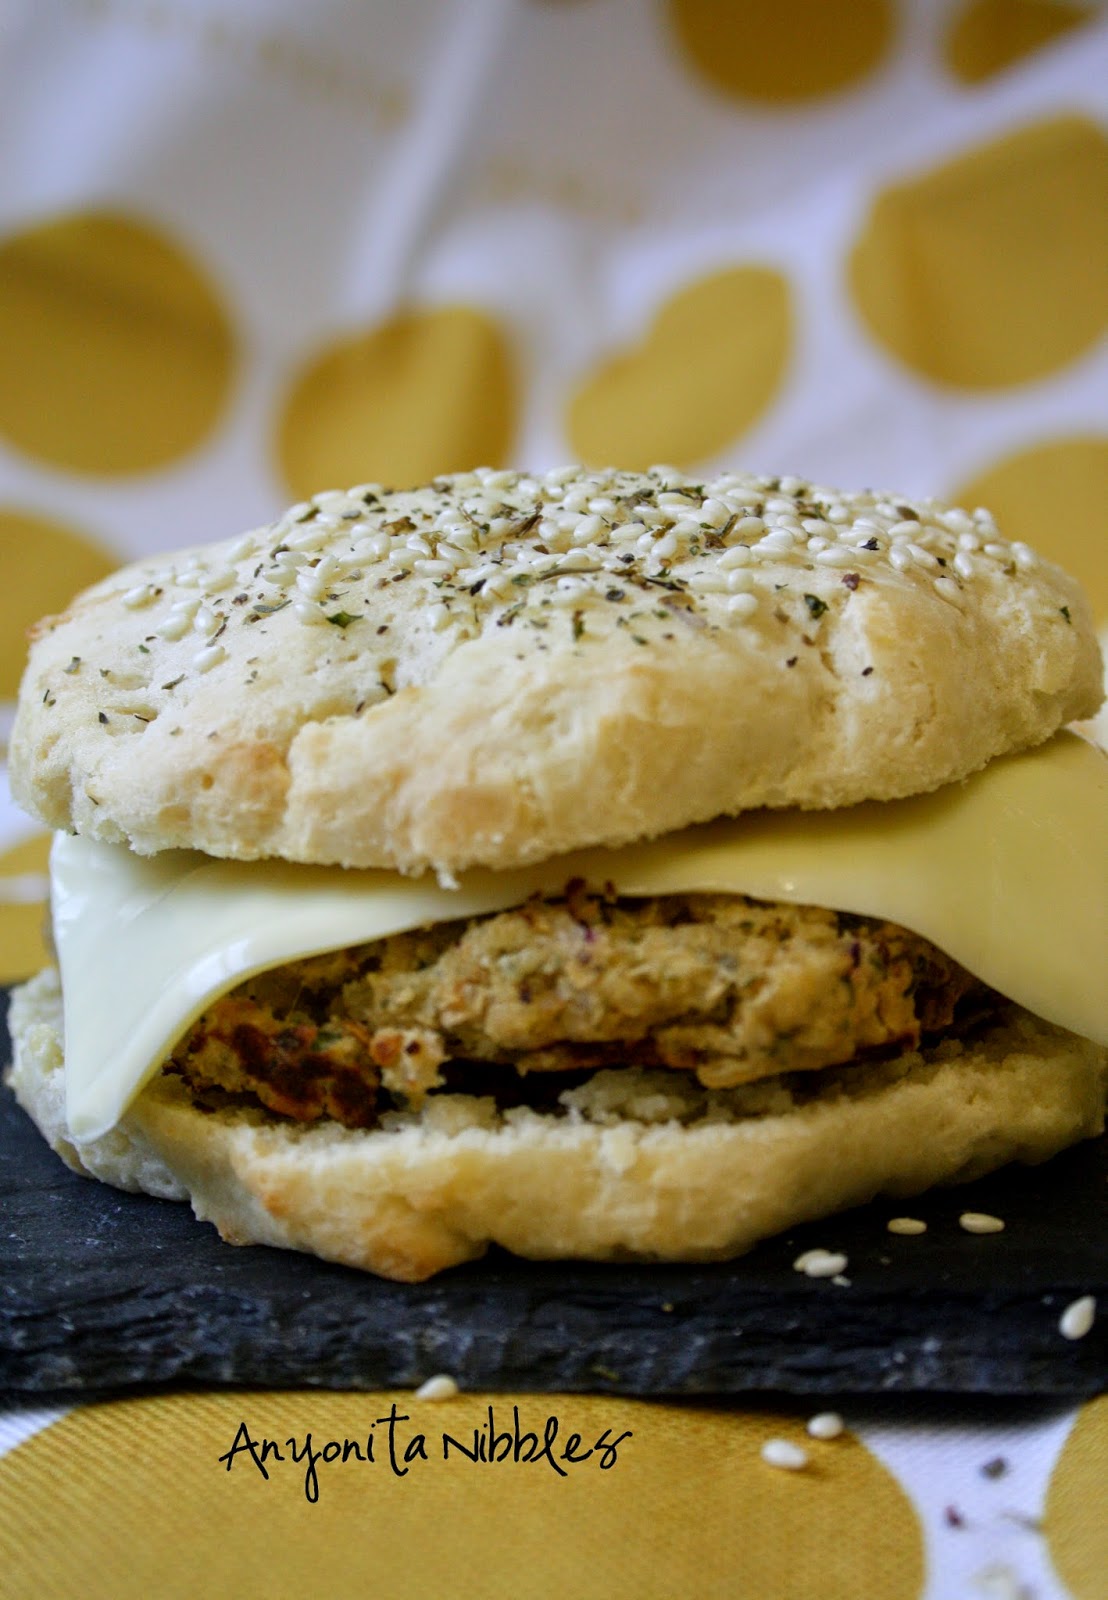 These vegetarian lemon & chickpea dukkah burgers on homemade gluten free buns would be perfect for a barbecue.